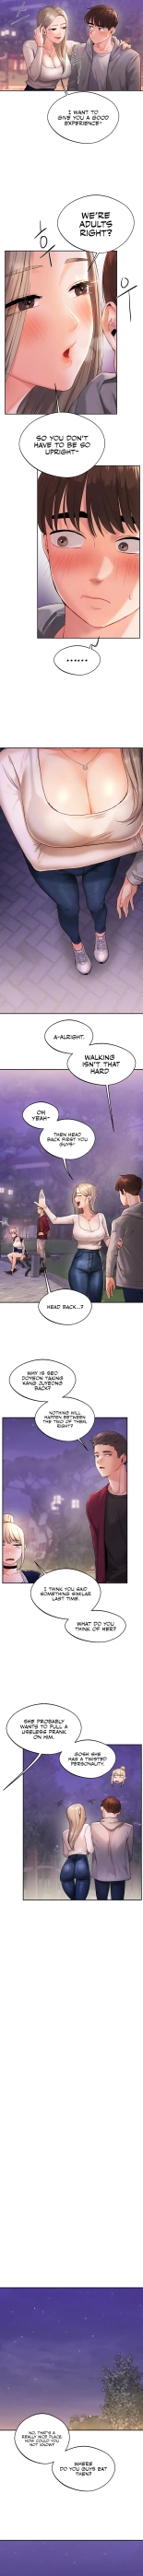 Relationship Reversal : page 19